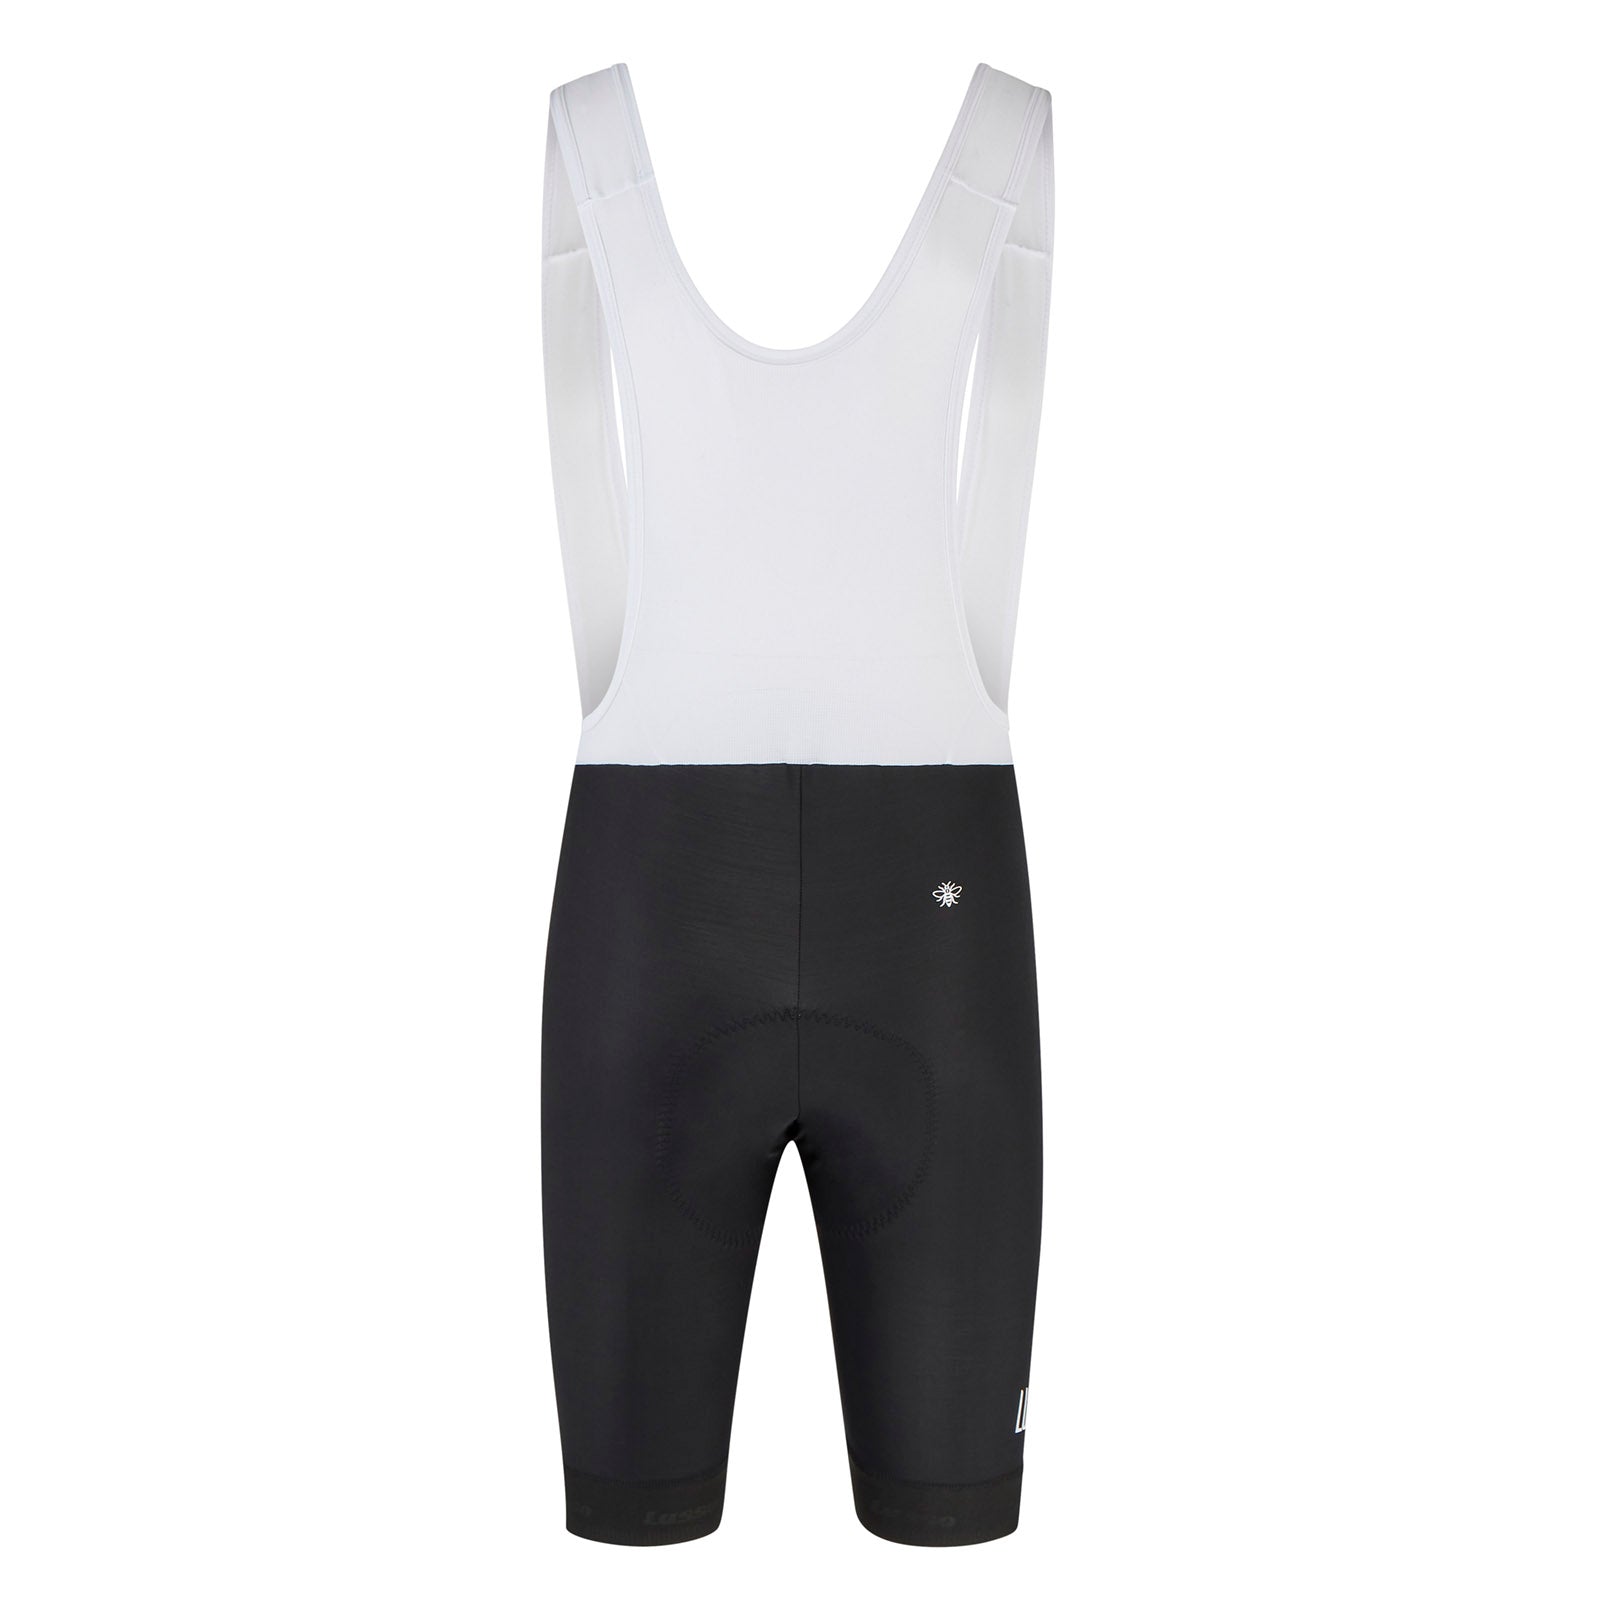 Primary Bib Shorts - Lusso Cycle Wear